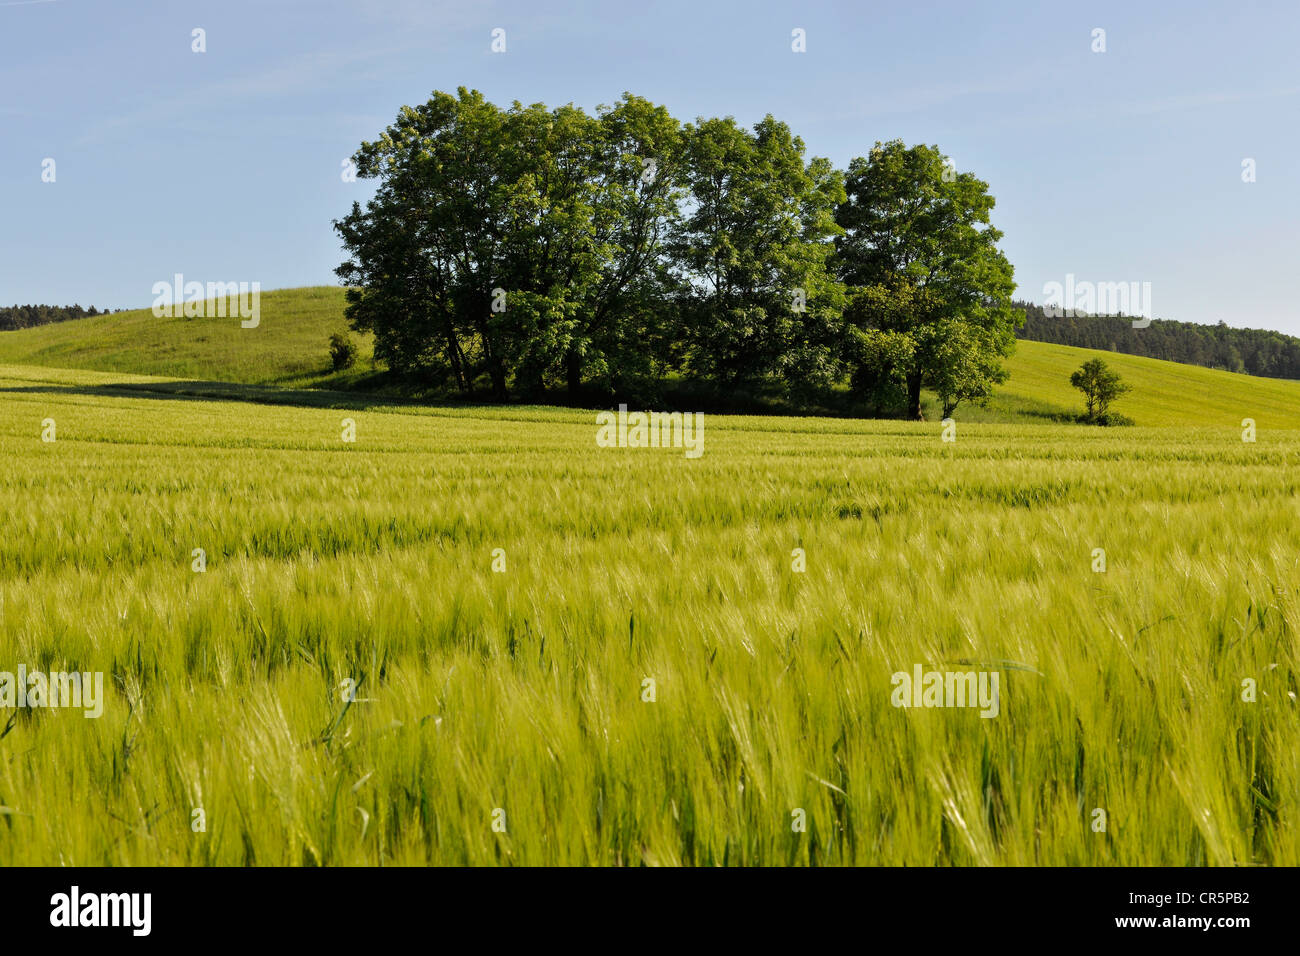 Group of trees in a field of Barley (Hordeum vulgare) with a blue sky, Thuringia, Germany, Europe Stock Photo